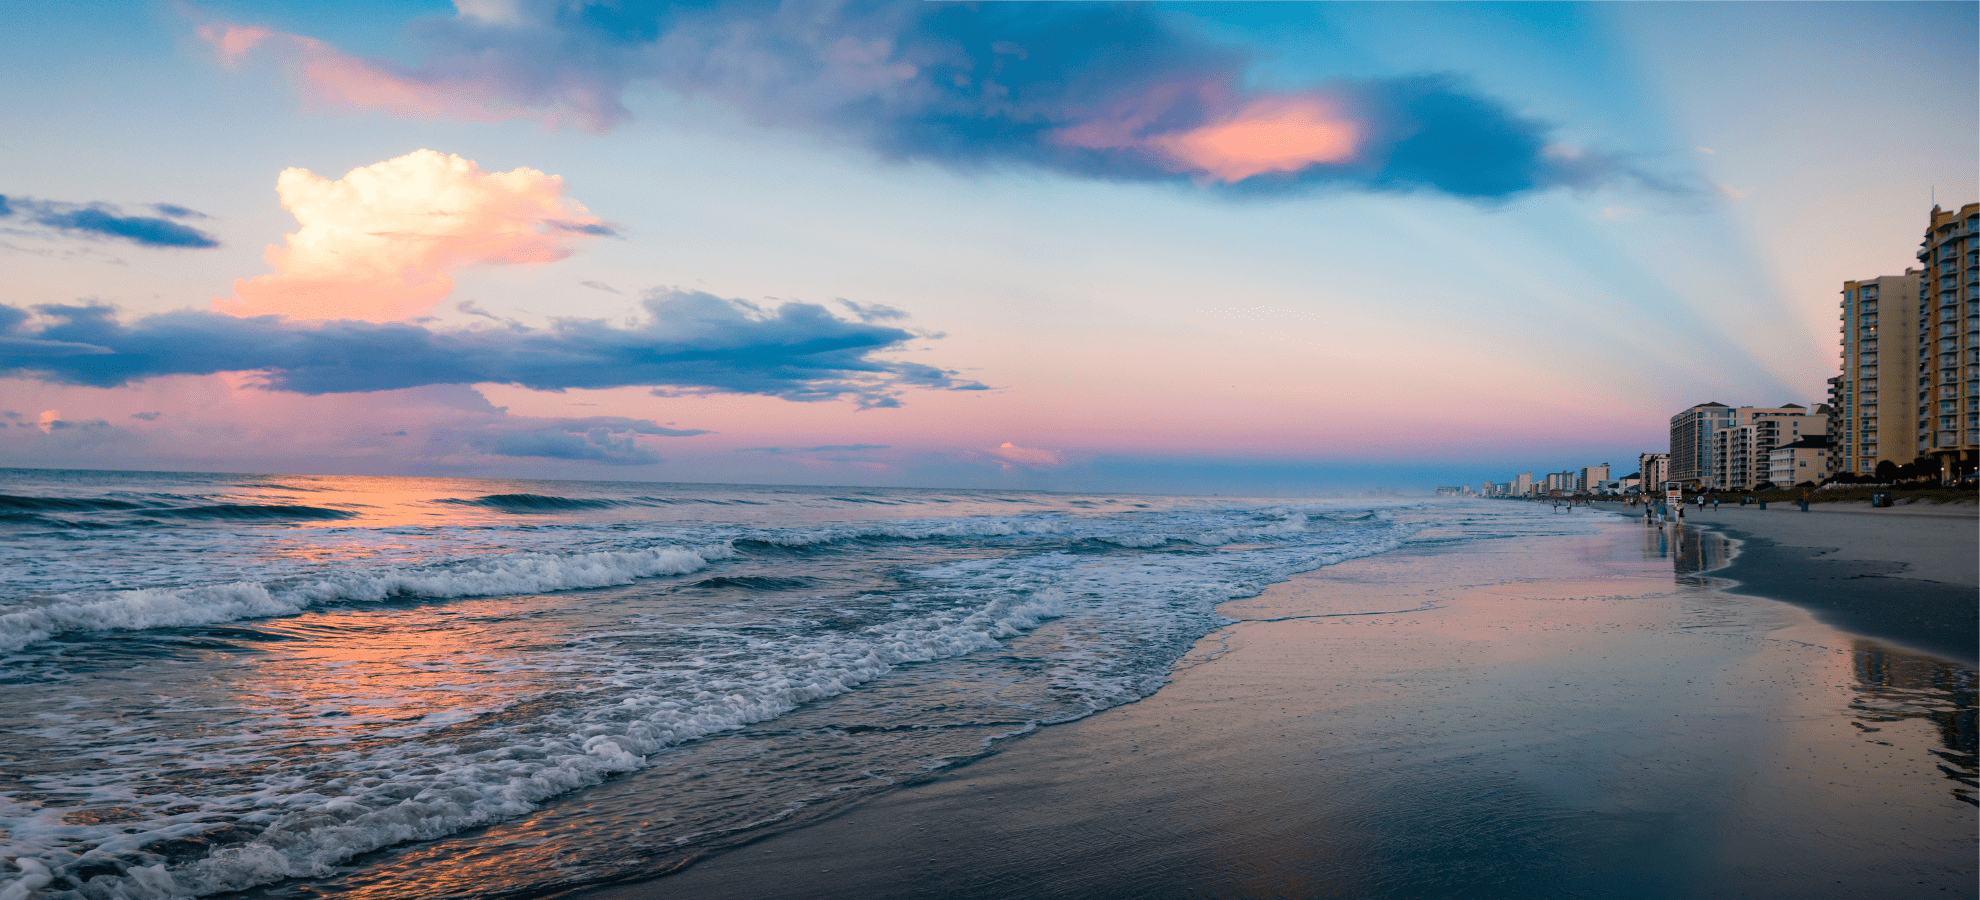 4 Compelling Reasons to Make Myrtle Beach Your New Home